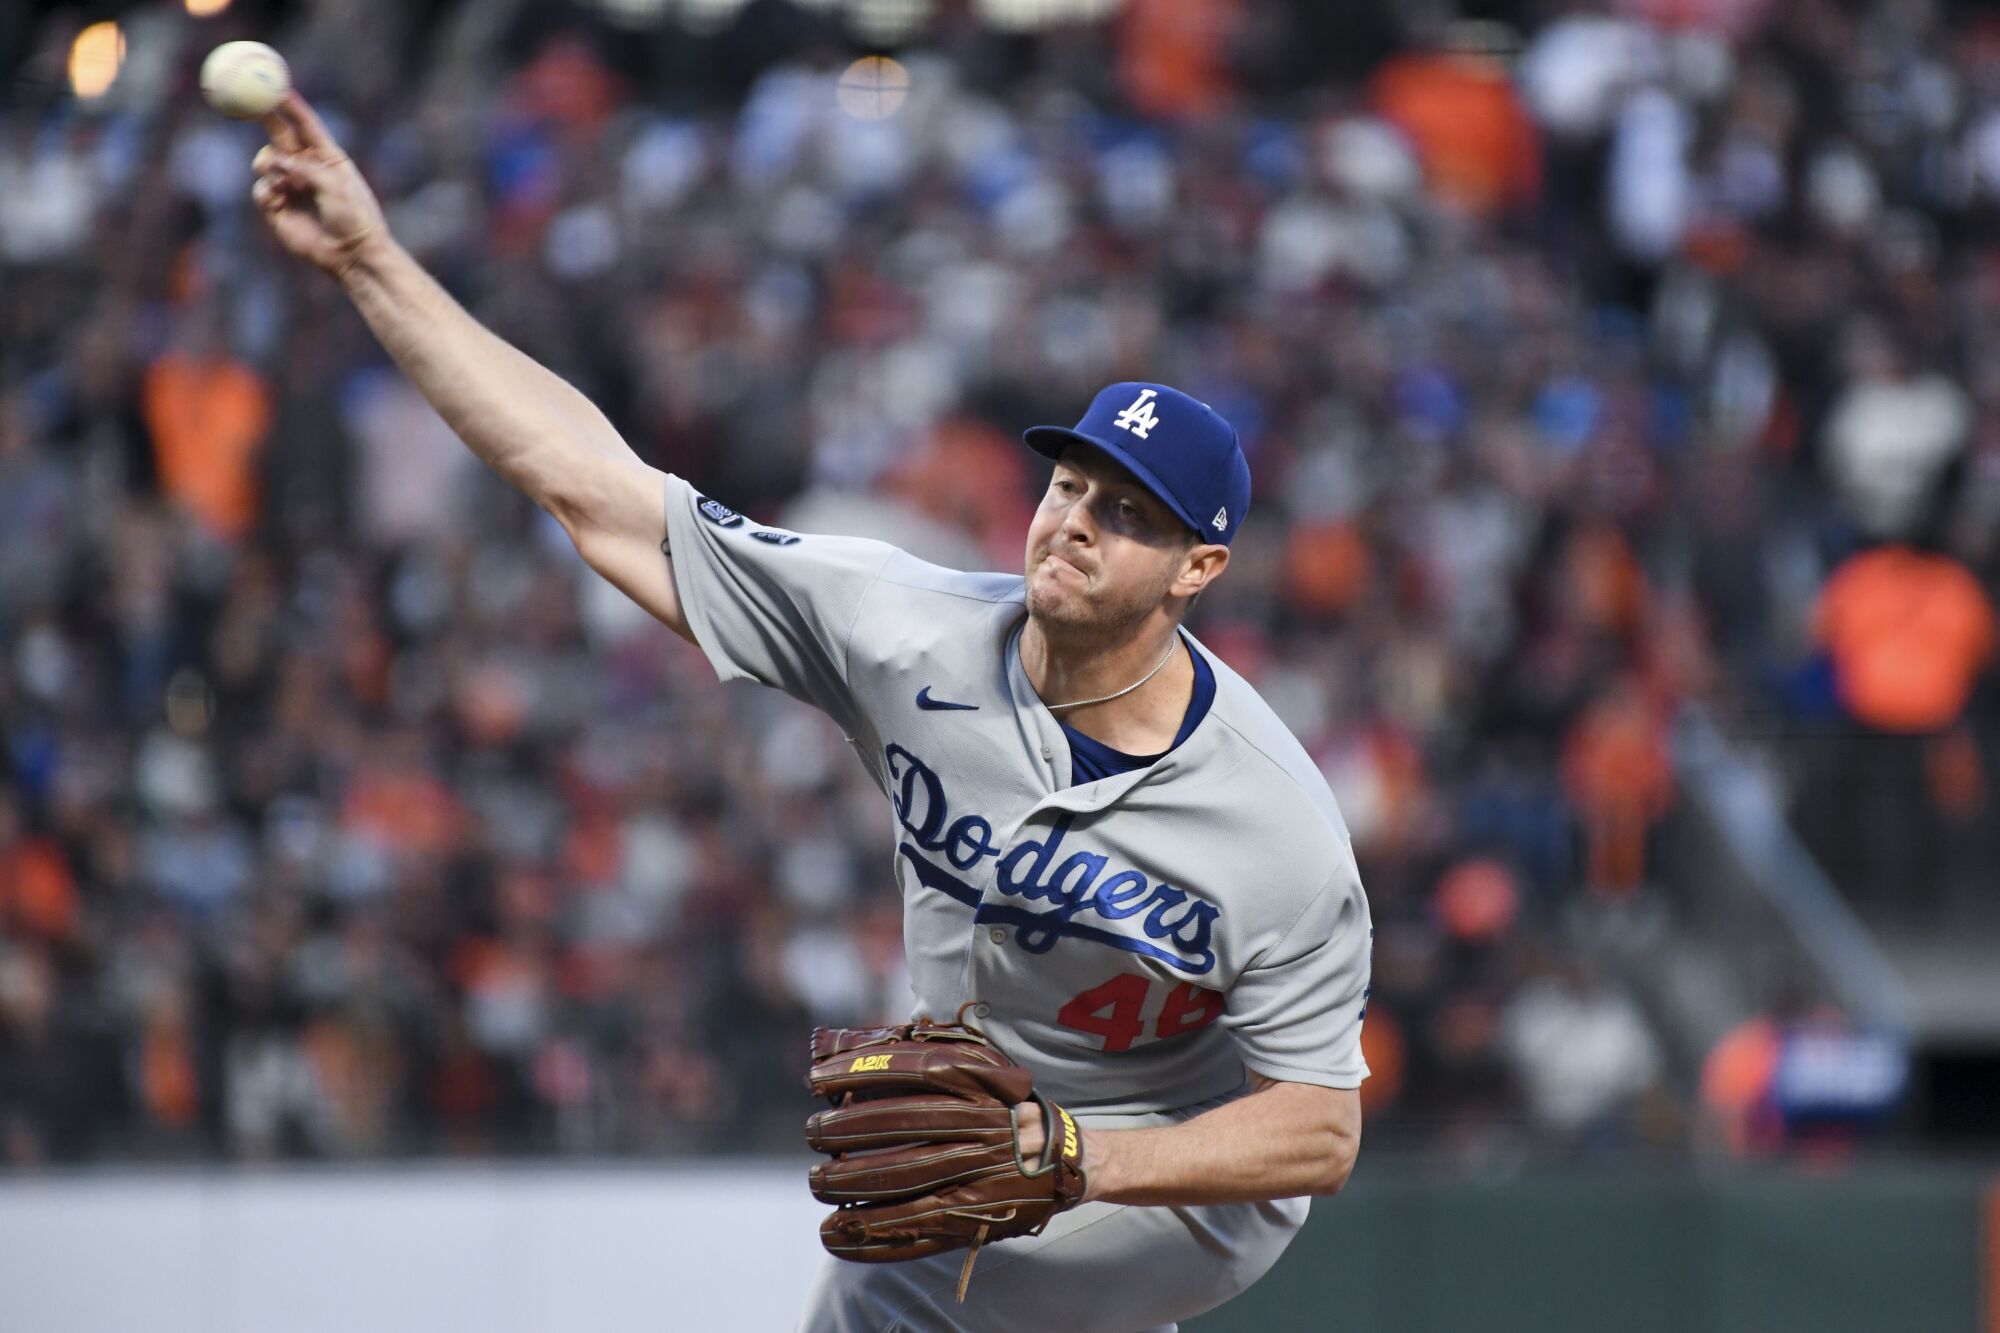 Dodgers starting pitcher Corey Knebel during the first inning.